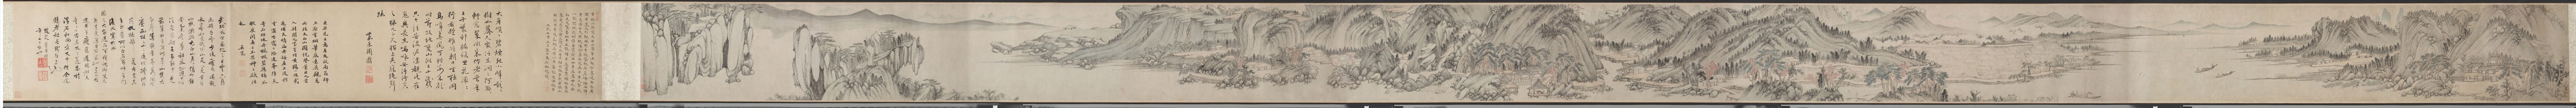 Mt. Taibo in the Style of Wang Meng, 1442. Du Qiong (Chinese, 1396-1474). Handscroll, ink and light